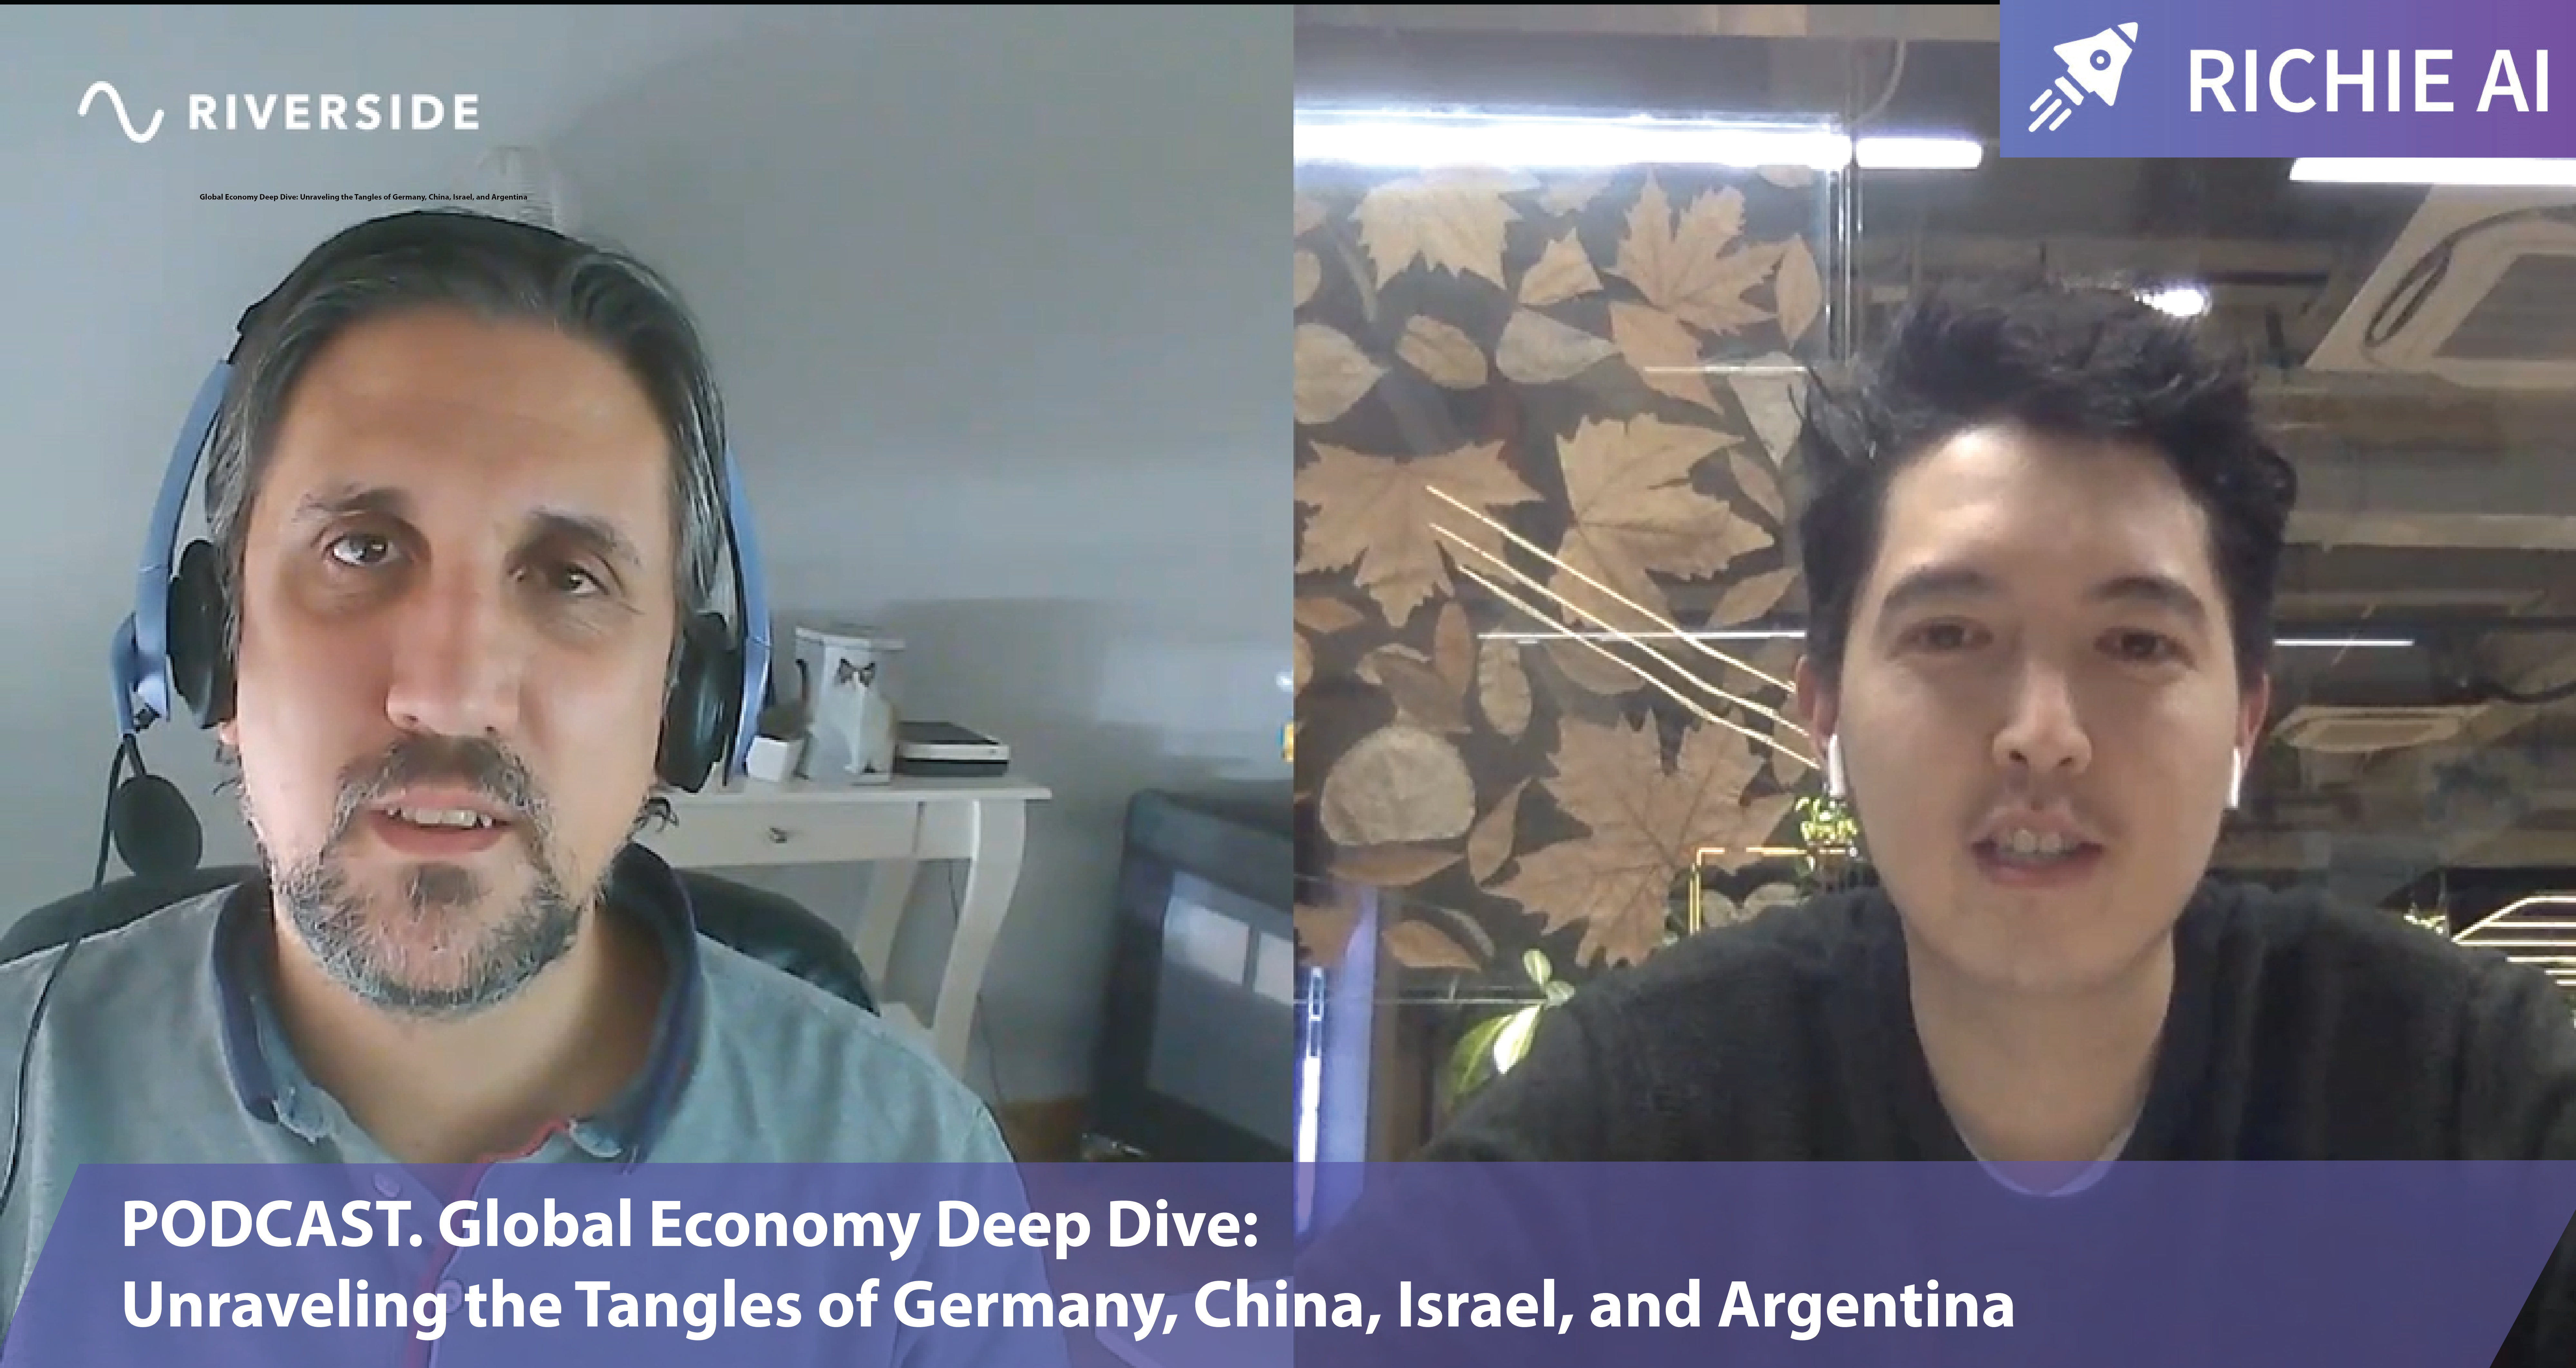 Podcast. Global Economy Deep Dive: Germany, China, Israel, and Argentina